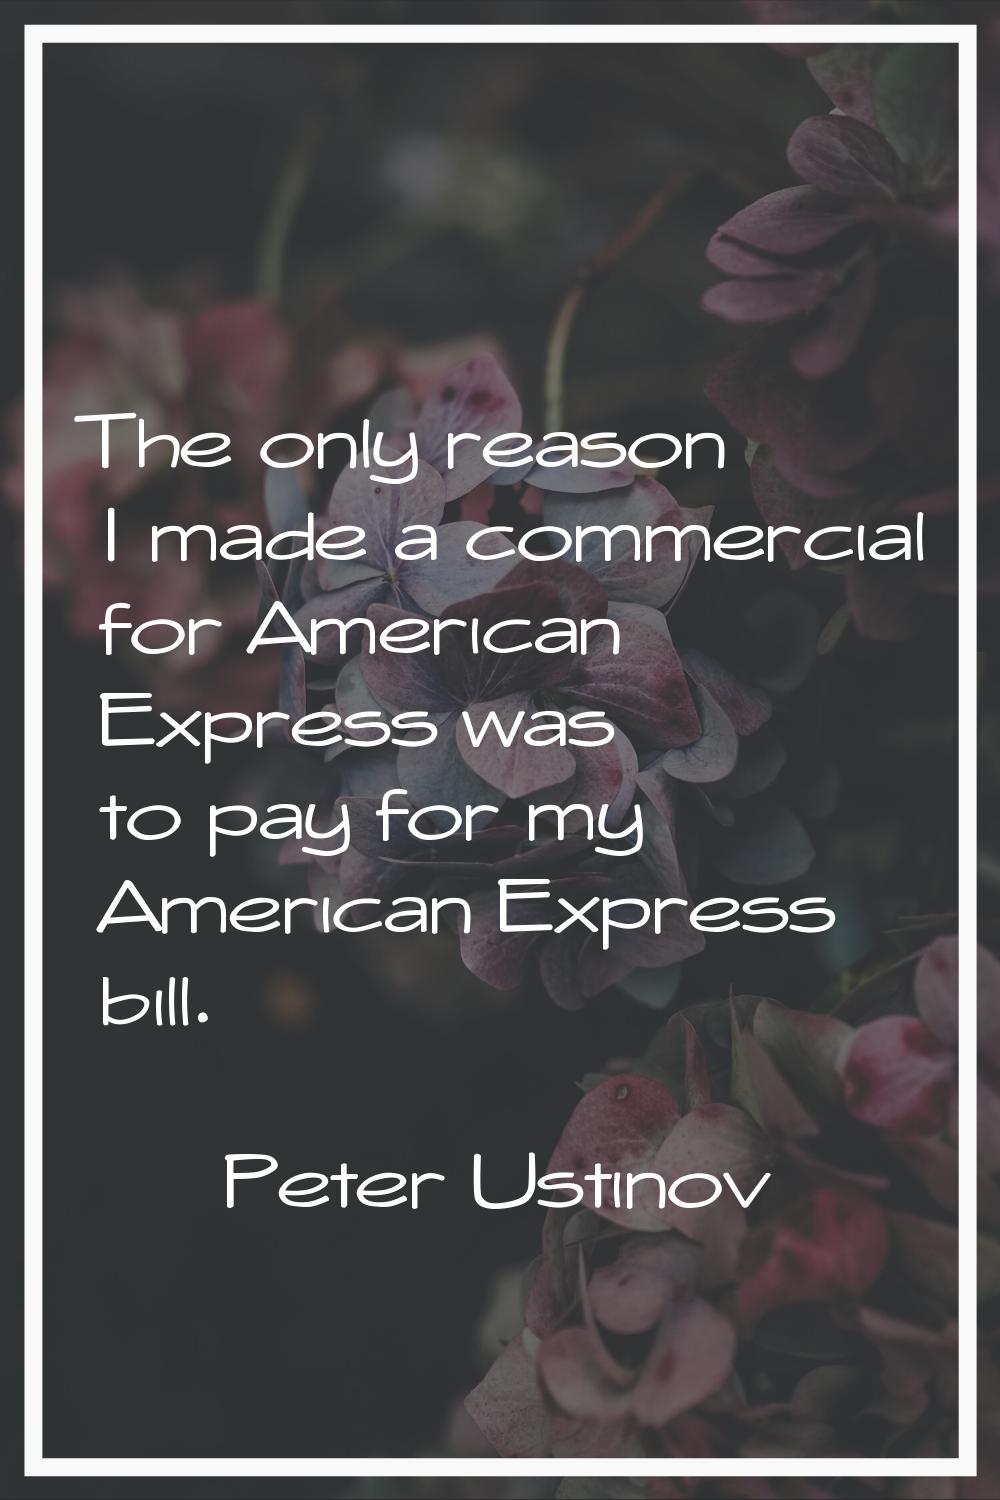 The only reason I made a commercial for American Express was to pay for my American Express bill.